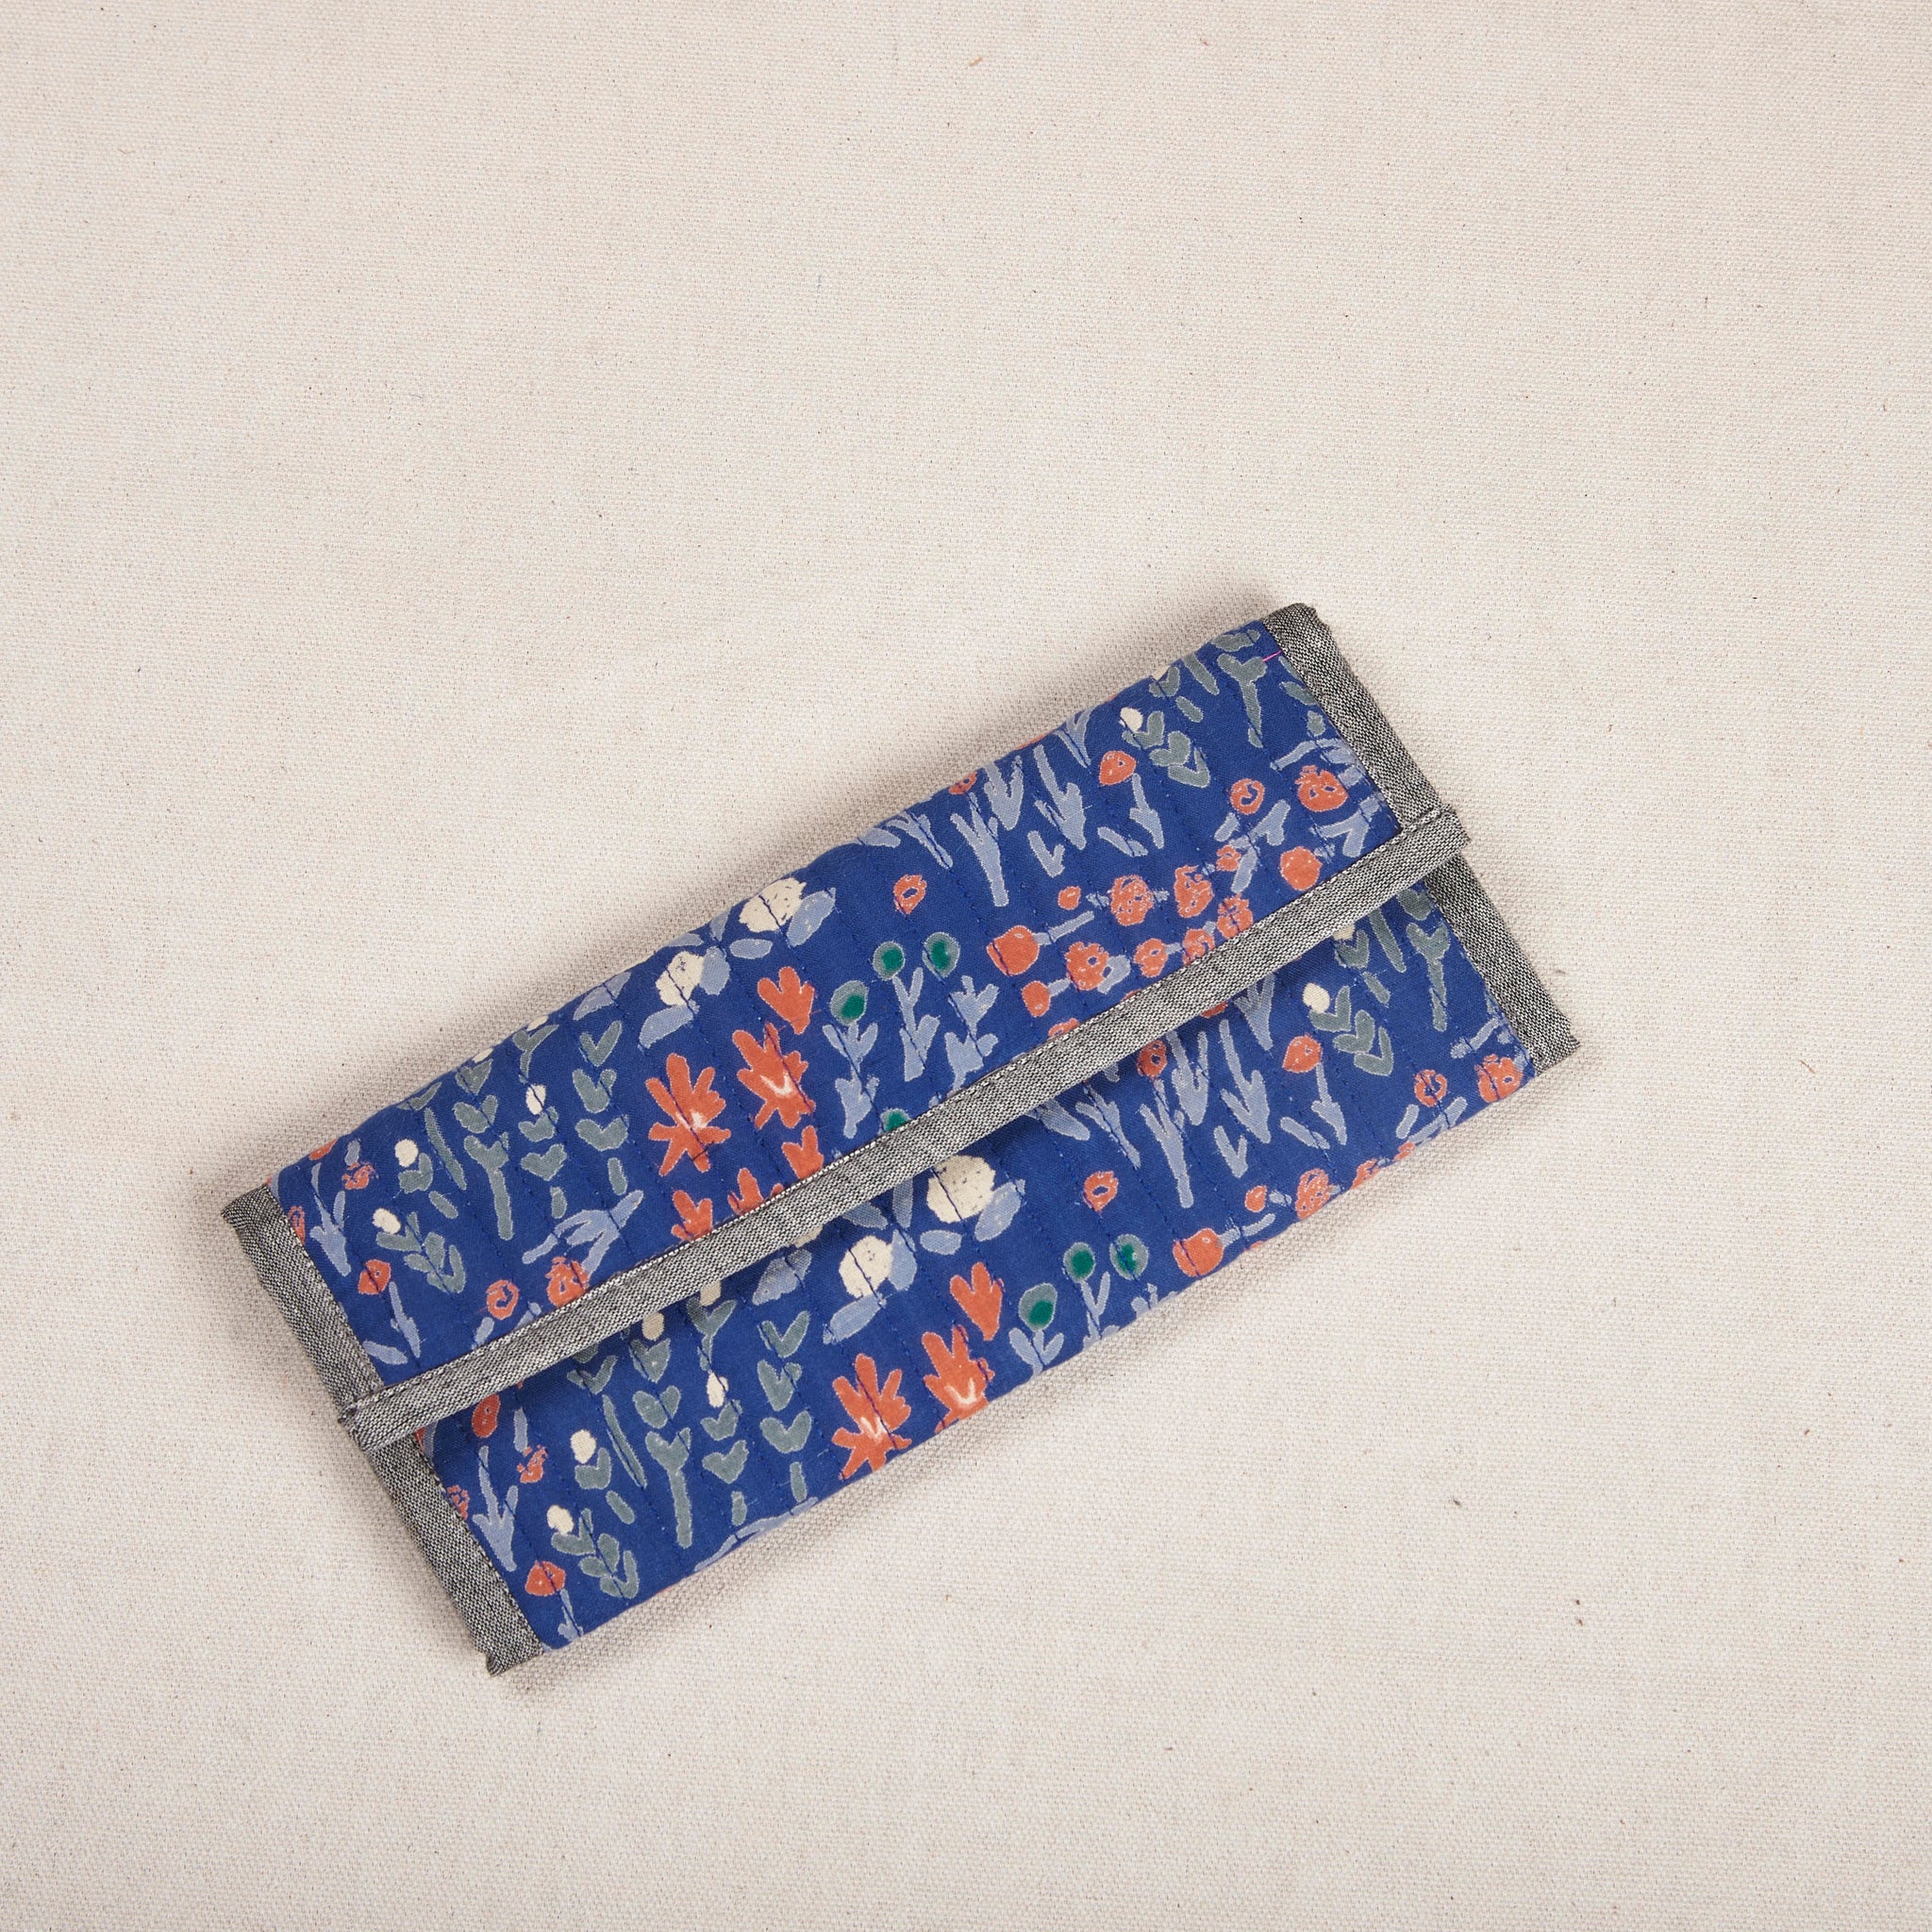 Kusum Wallet - Blue with Floral Print